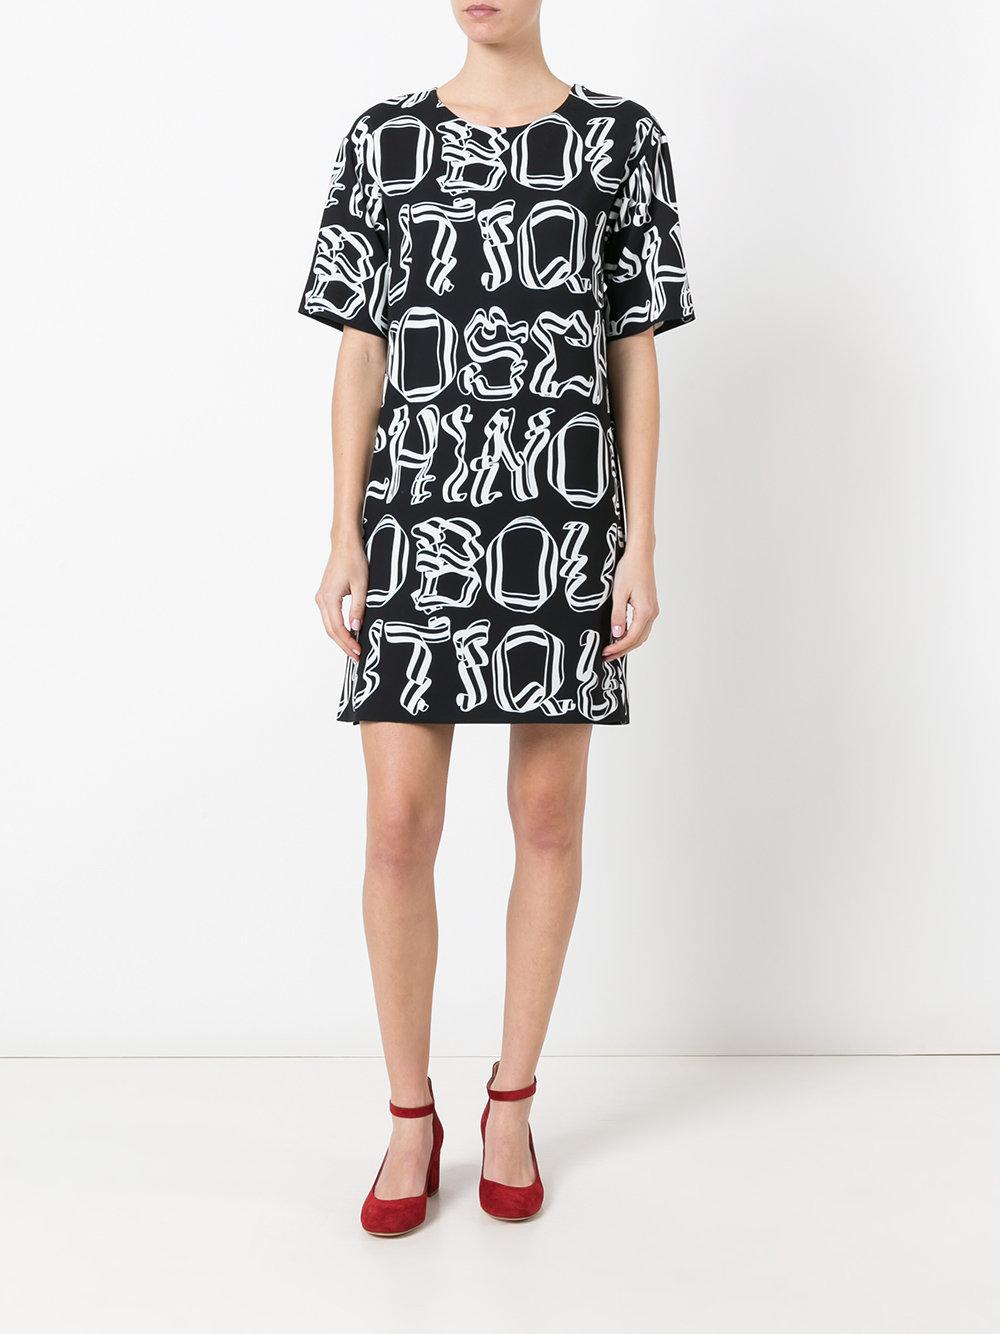 Boutique moschino Letter Print Dress in Black | Lyst